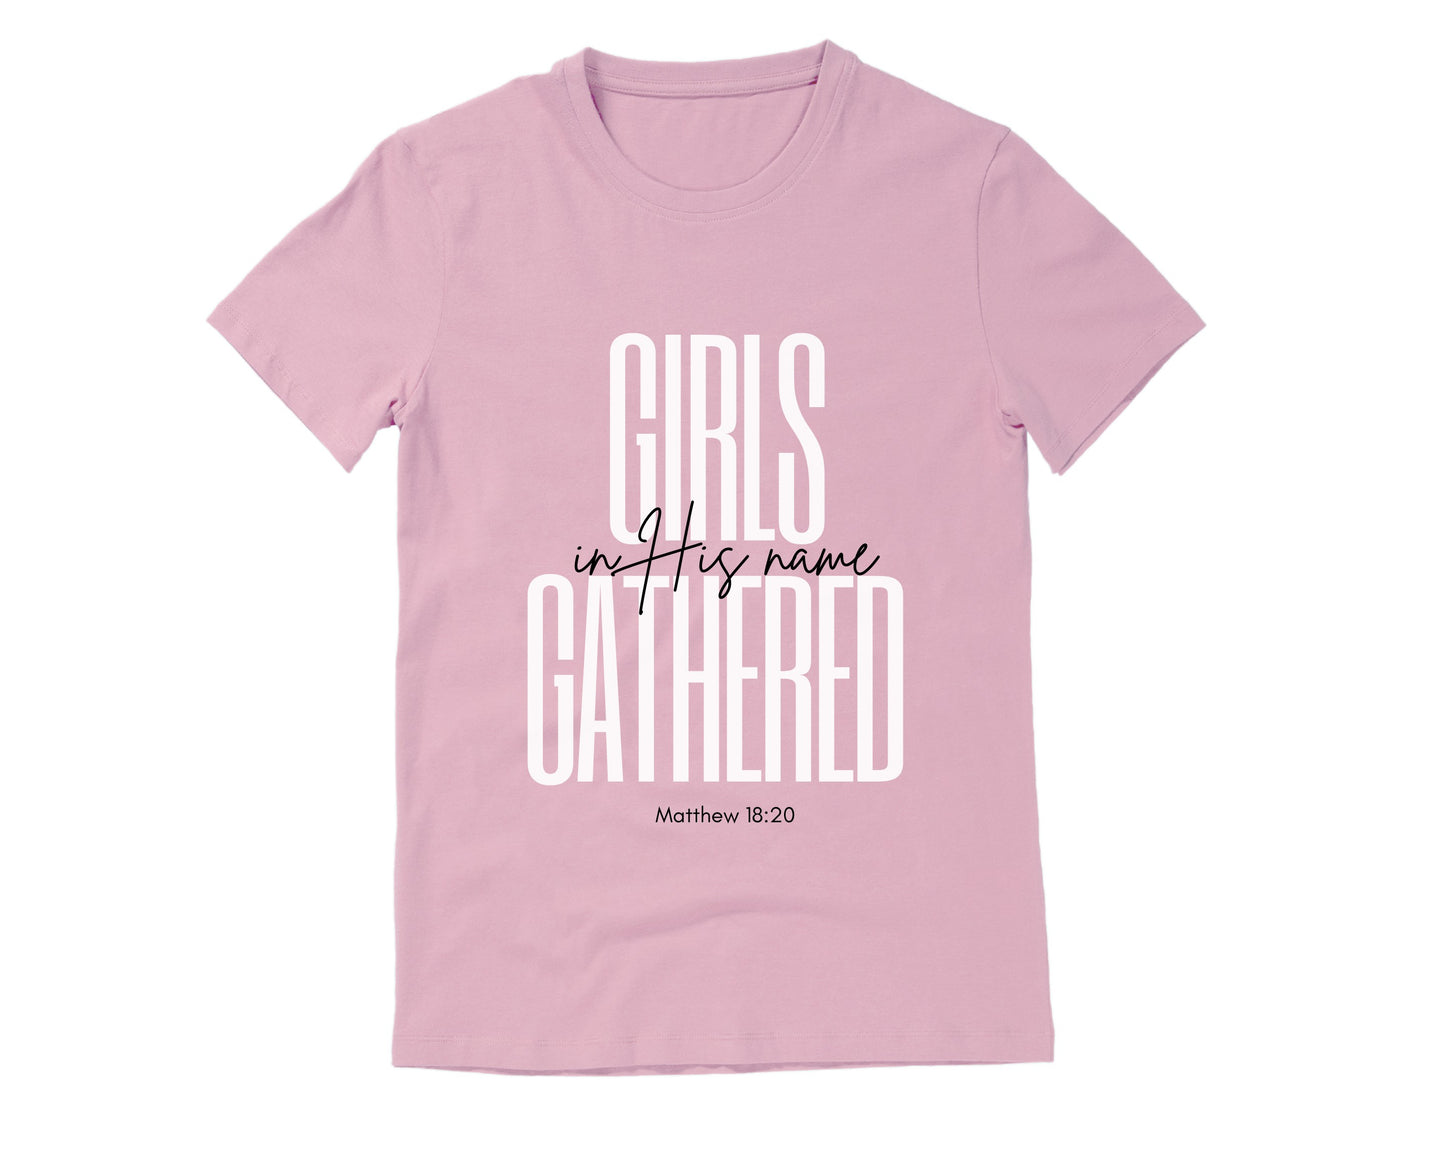 Christian girls T-Shirt for Small Groups in light pink.